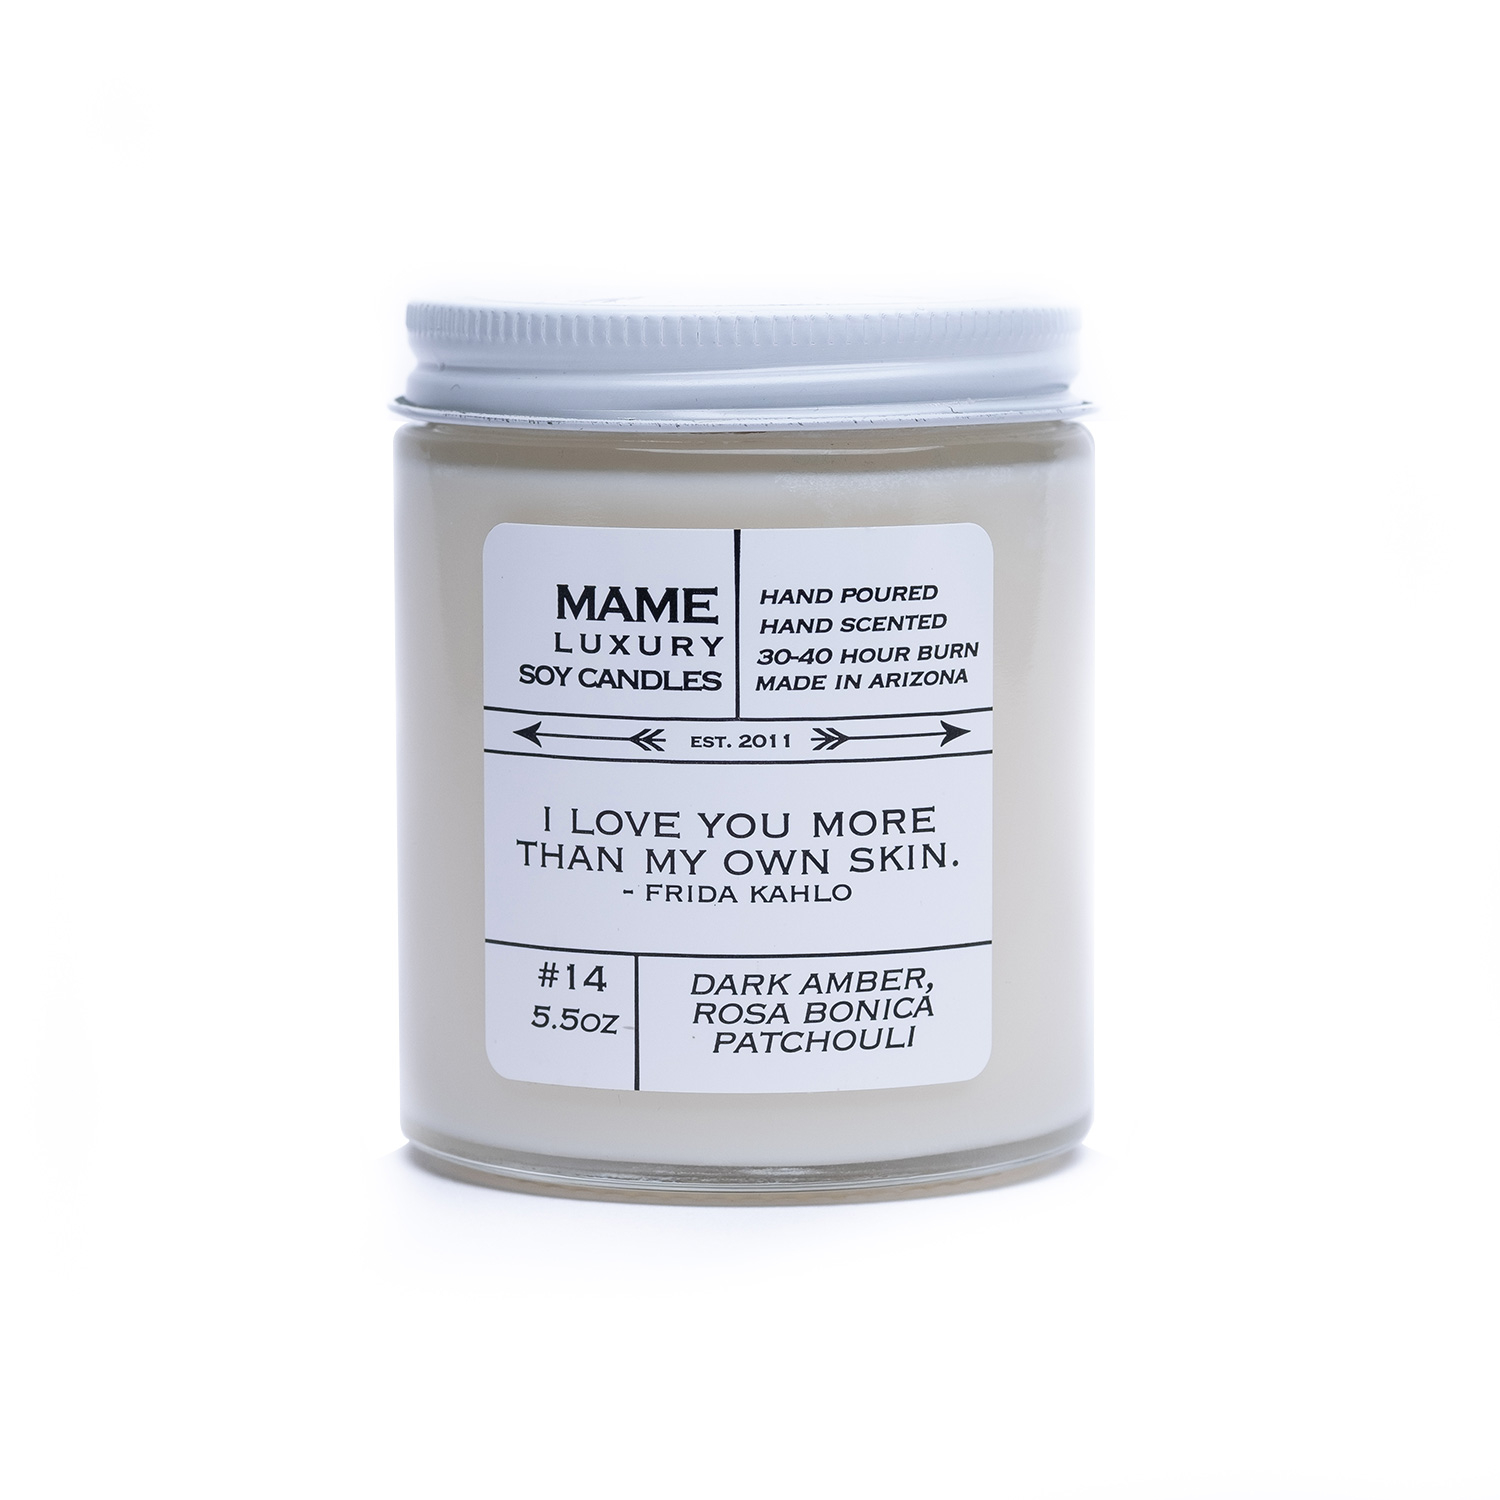 14 - Dark Amber. Rosa Bonica, Patchouli — MAME Soy Candles